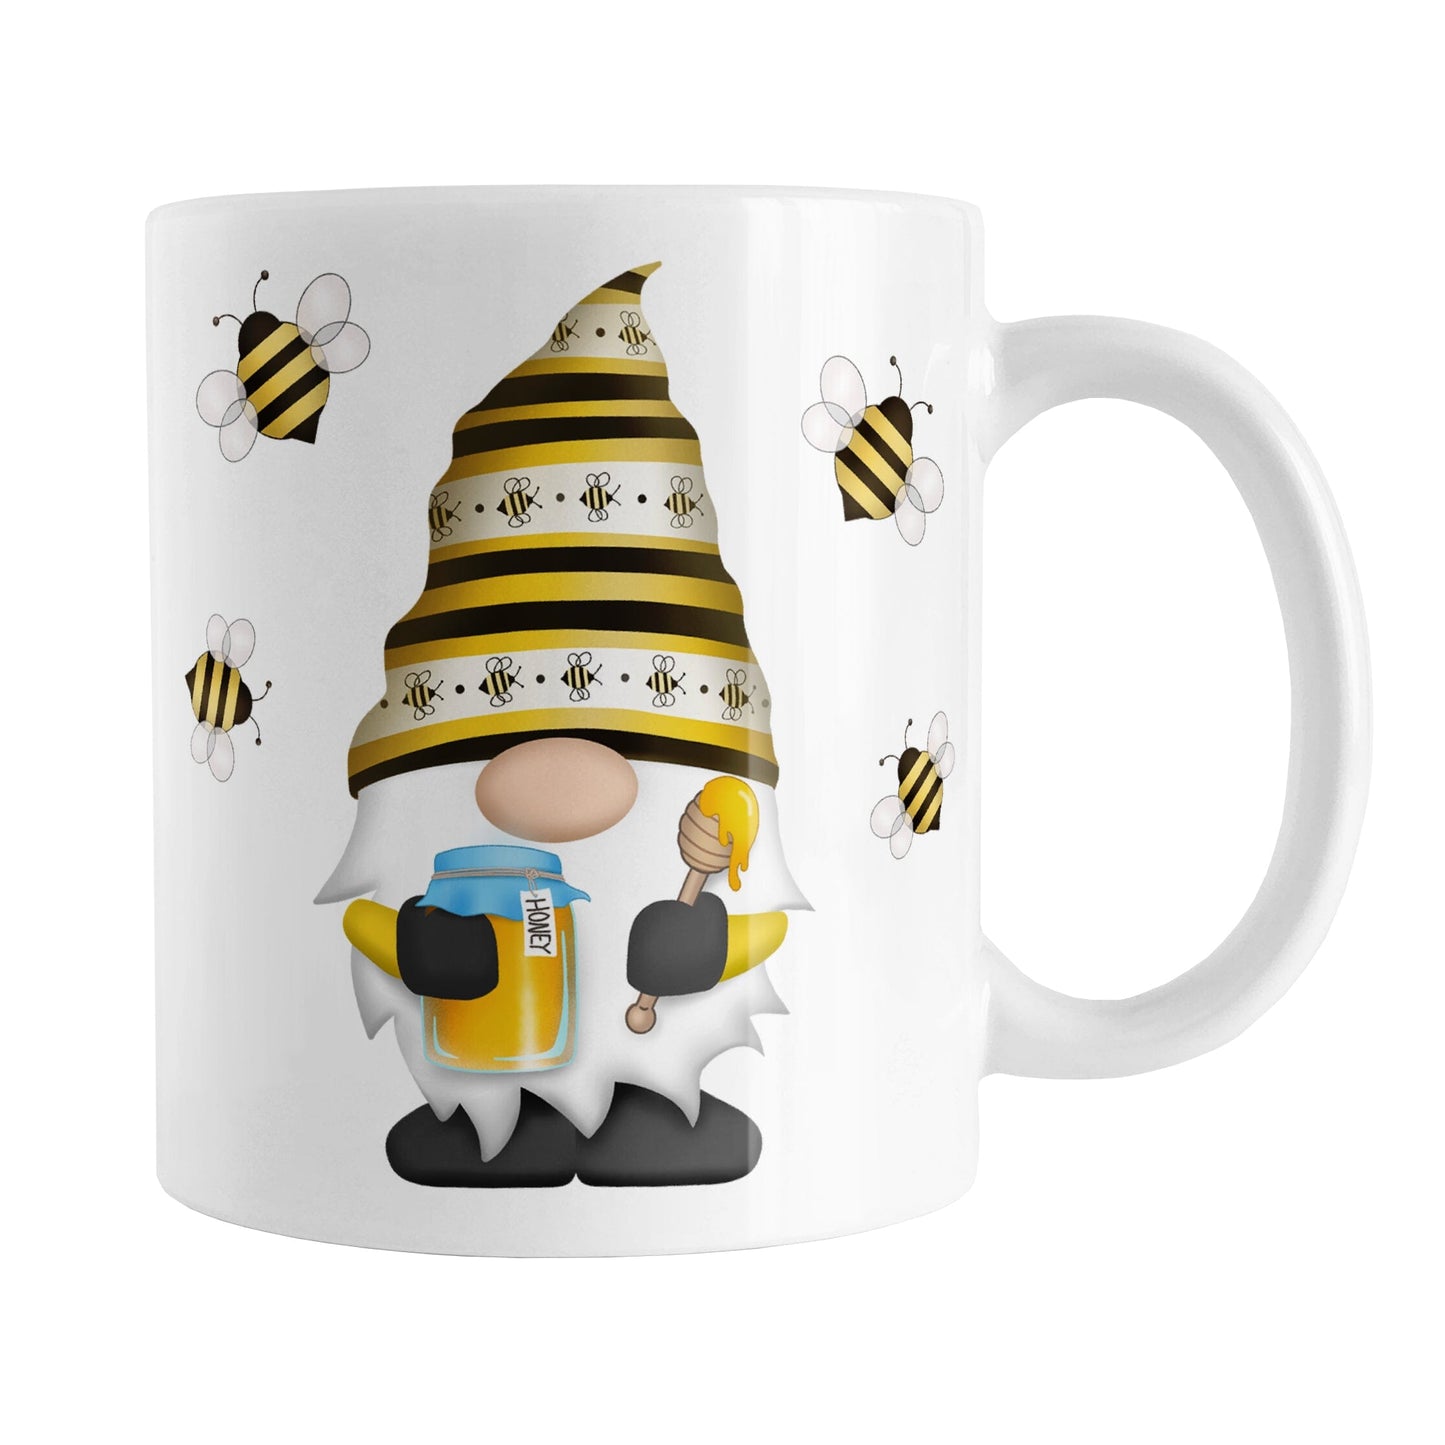 Honey Bee Gnome Mug (11oz) at Amy's Coffee Mugs. A ceramic coffee mug designed with a gnome wearing an adorable hat with black and yellow stripes and bees, holding a jar of honey and a honey dipper, with bees flying around the gnome. This cute honey bee gnome illustration is on both sides of the mug. 